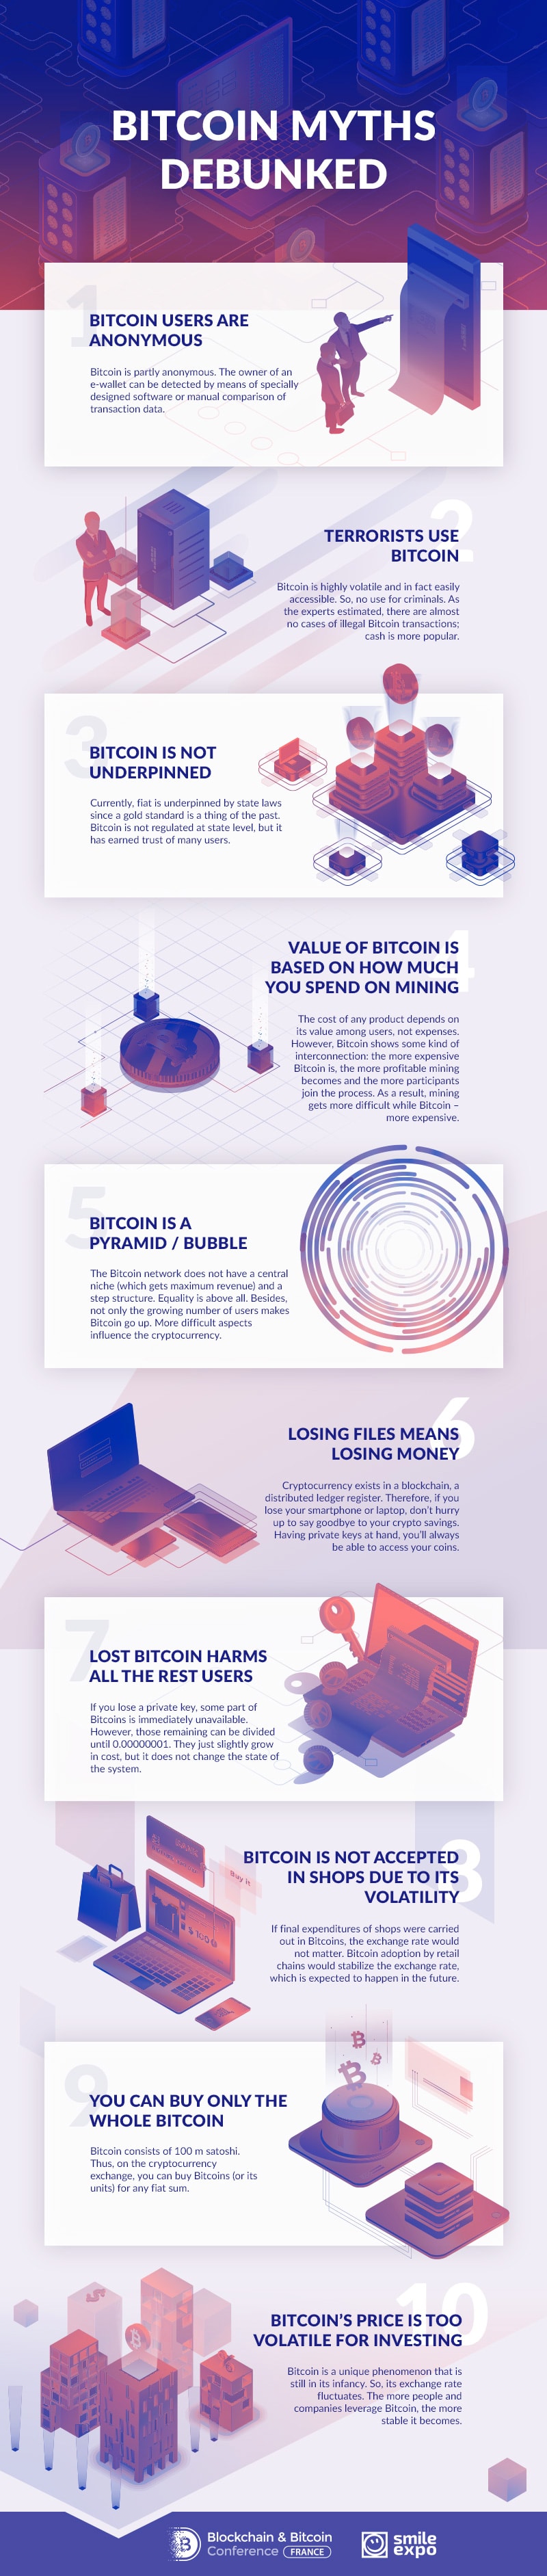 Infographic: Bitcoin myths debunked 